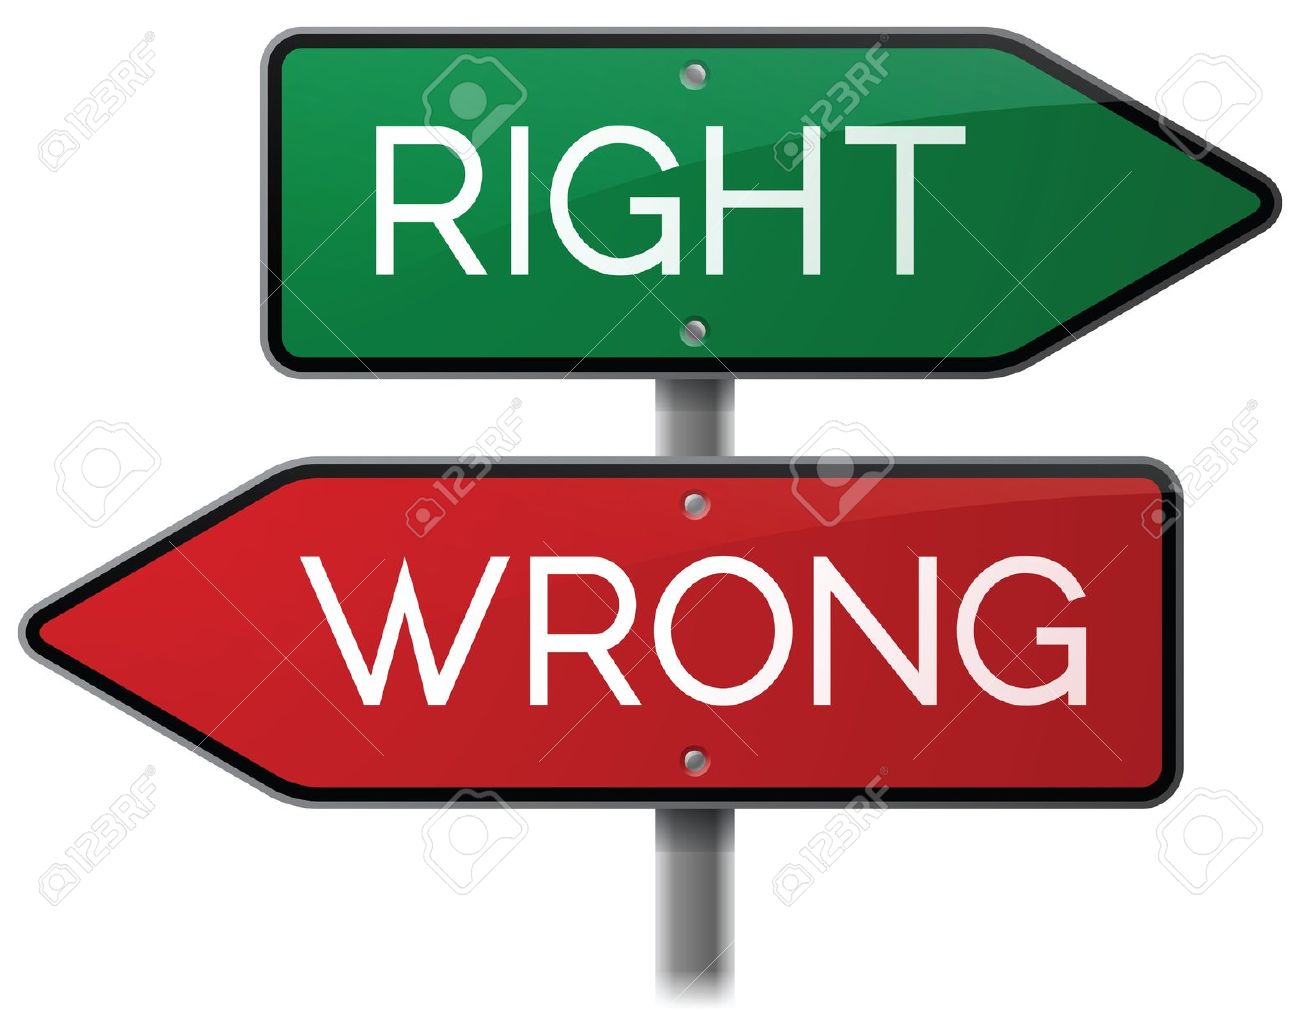 Right Or Wrong Sign Royalty Free Cliparts, Vectors, And Stock.